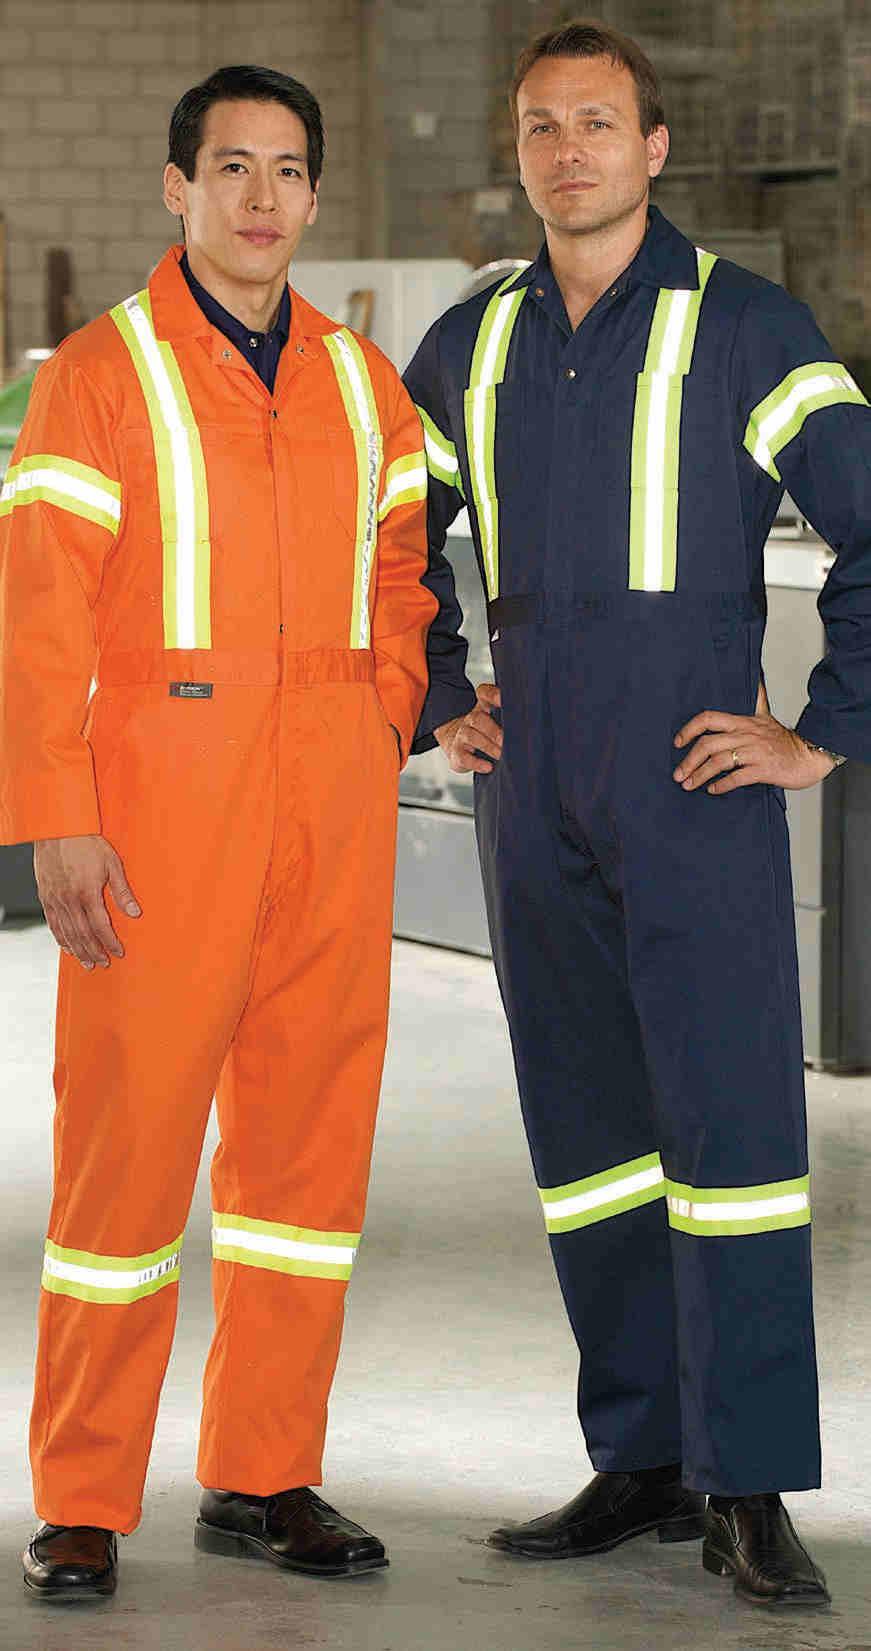 COVERALLS 2 Reflective Tape Coveralls Bright two-tone reflective stripes on front, back, pant-legs and sleeves to maximize visibility.